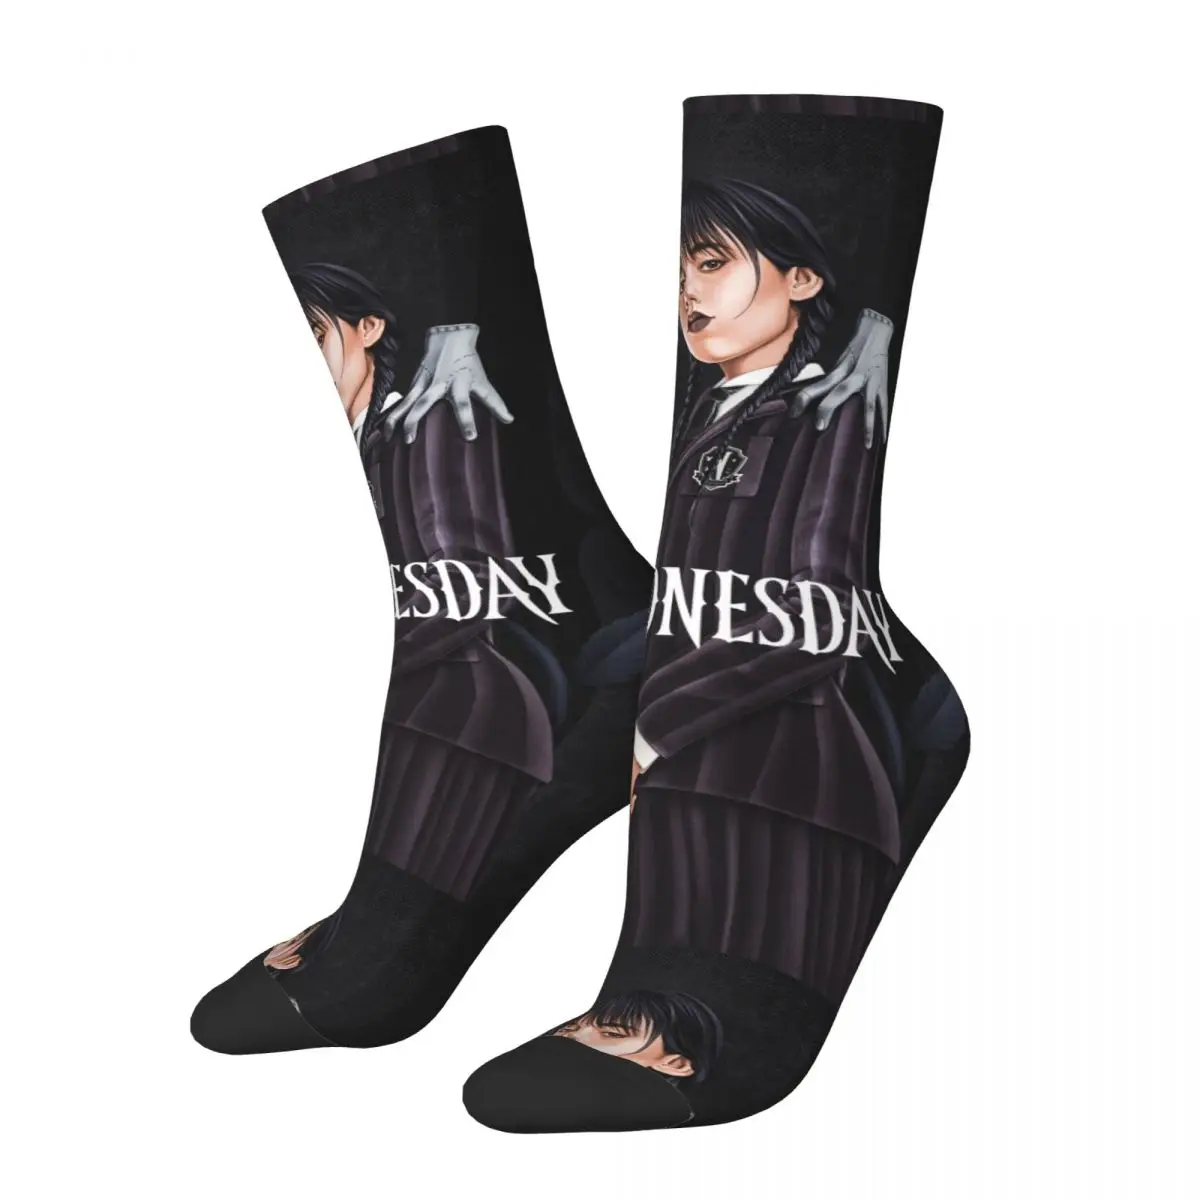 

Crew Socks Wednesday Addams Awesome Accessories for Men Women Cozy Stockings All Season Birthday Present